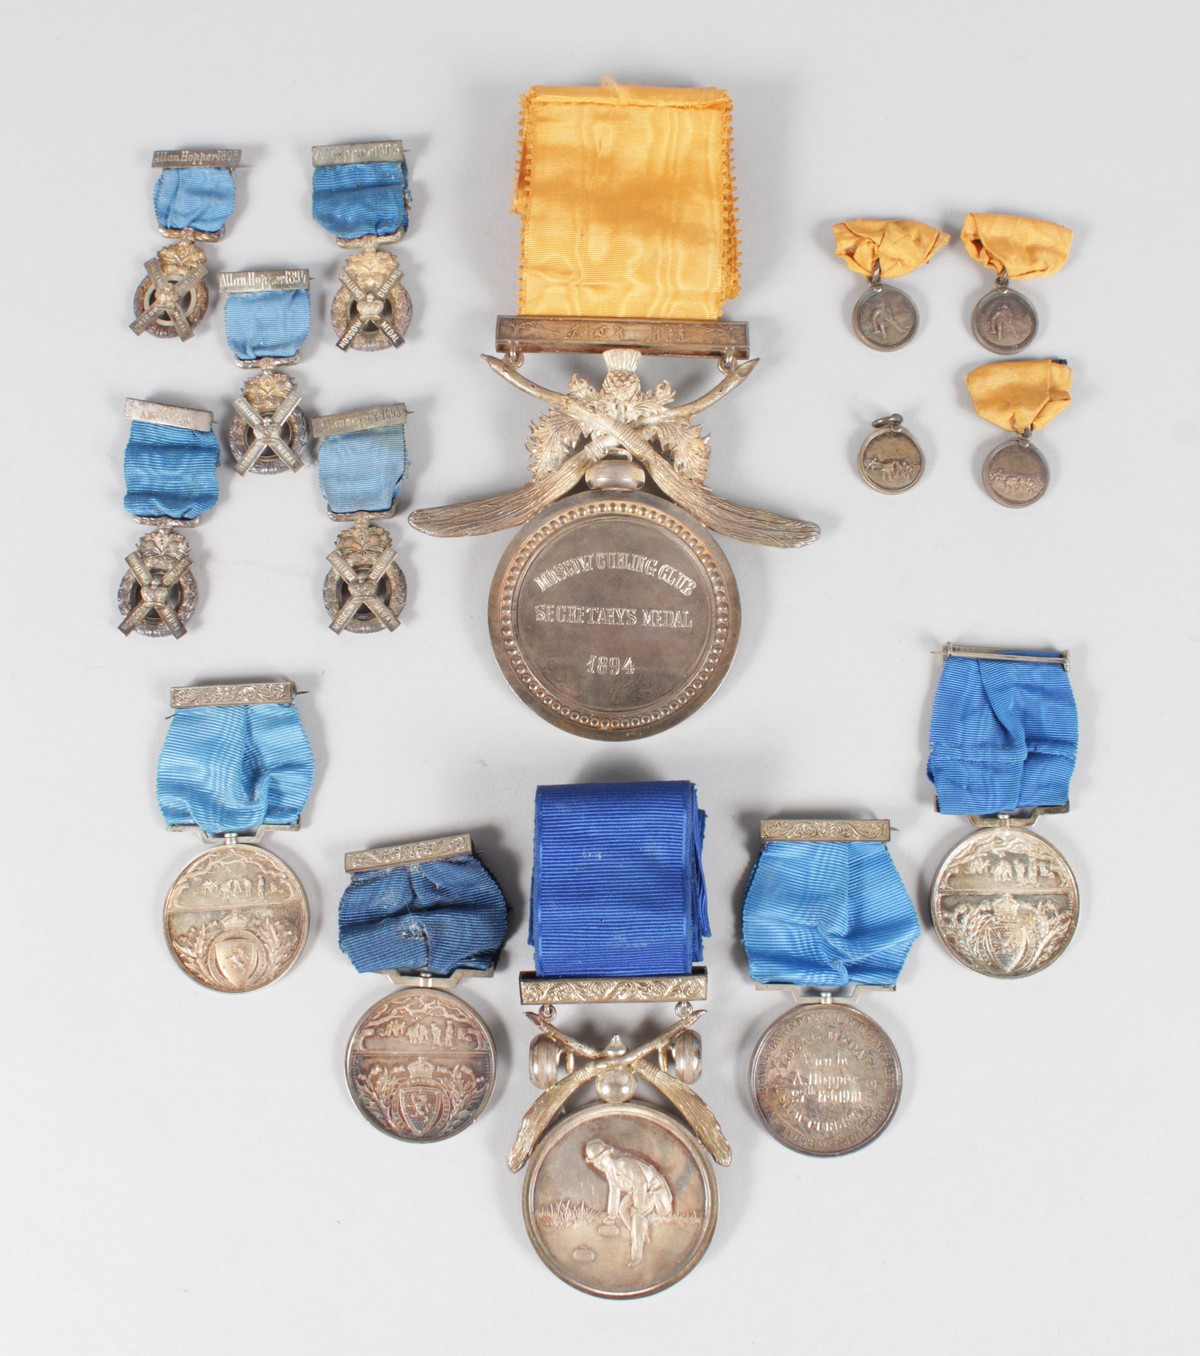 A COLLECTION OF MEDALS won by ALLAN HOOPER, MOSCOW CURLING CLUB, CIRCA. 1890-1910 (11), and five